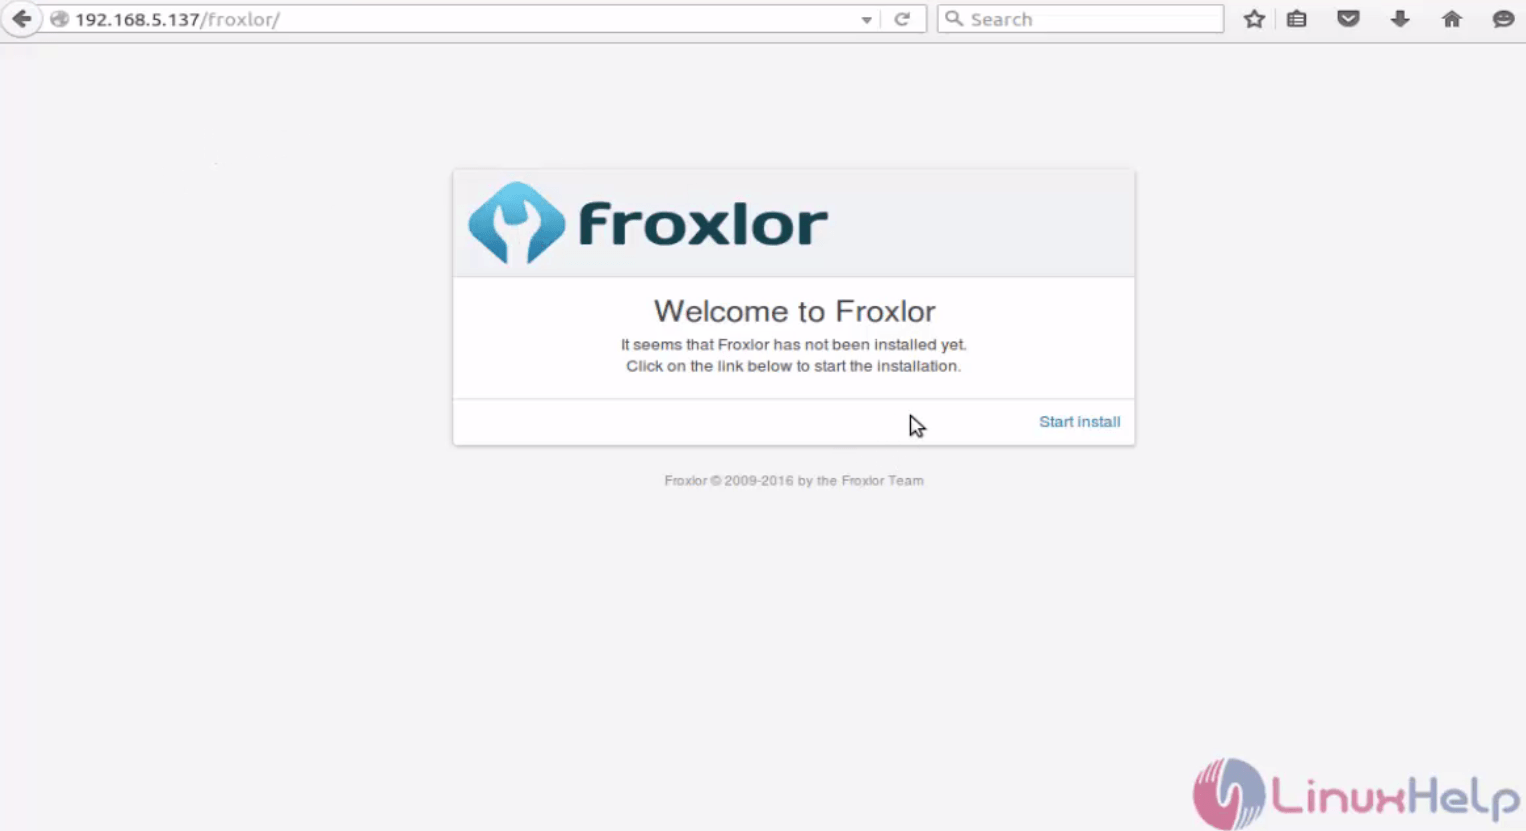 installation-Froxlor-server-management-tool-manage-multiple-user-services-domain-services-web-server-email-accounts-Ubuntu-Welcome-page